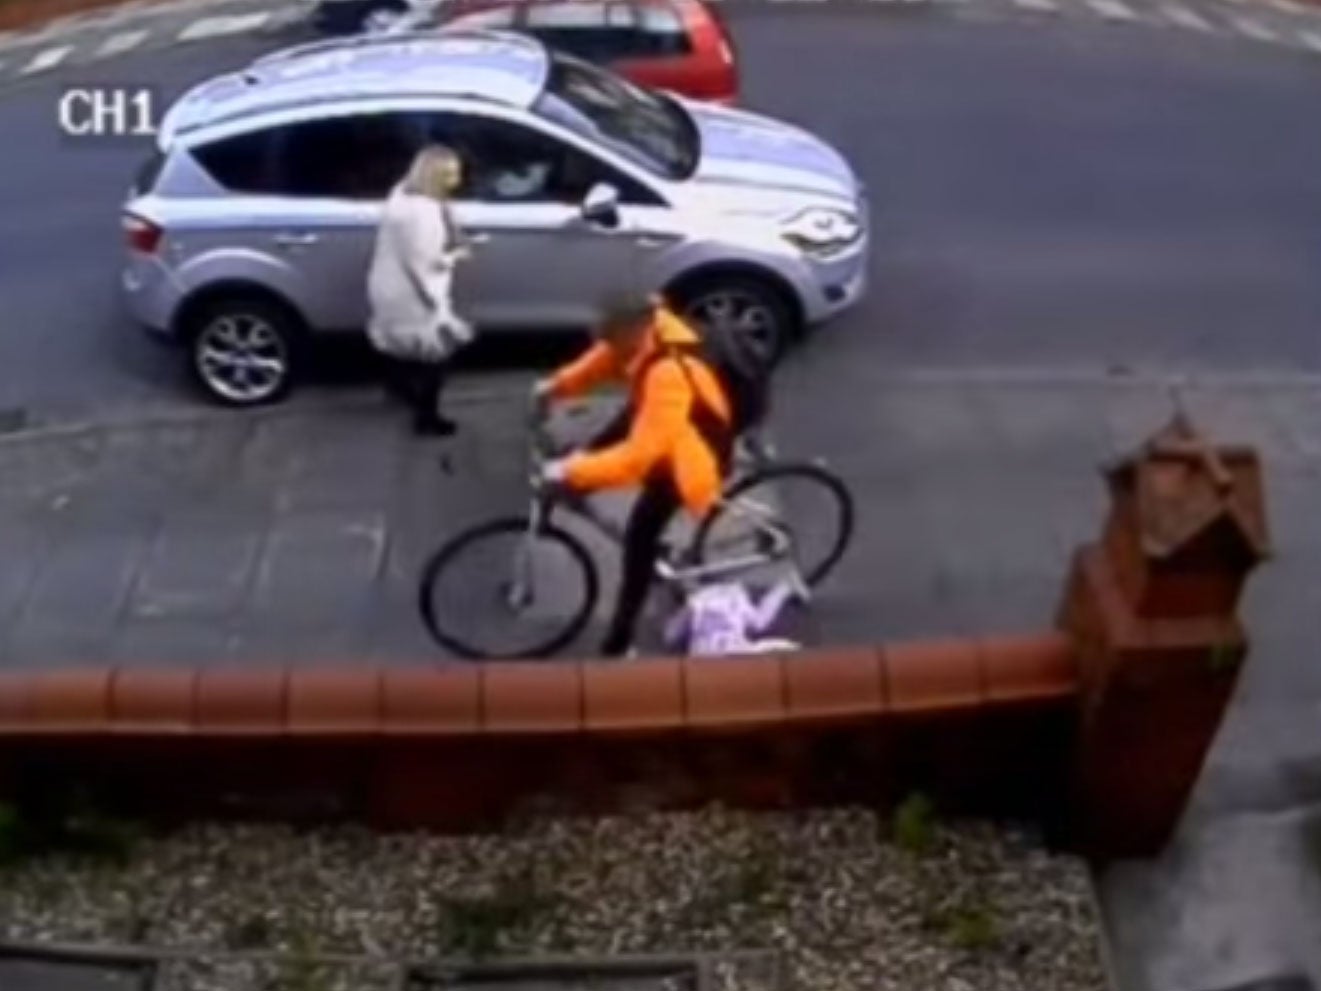 CCTV footage shows Andrew Holland dragging Lucie Wilding across the pavement after hitting her with his bike